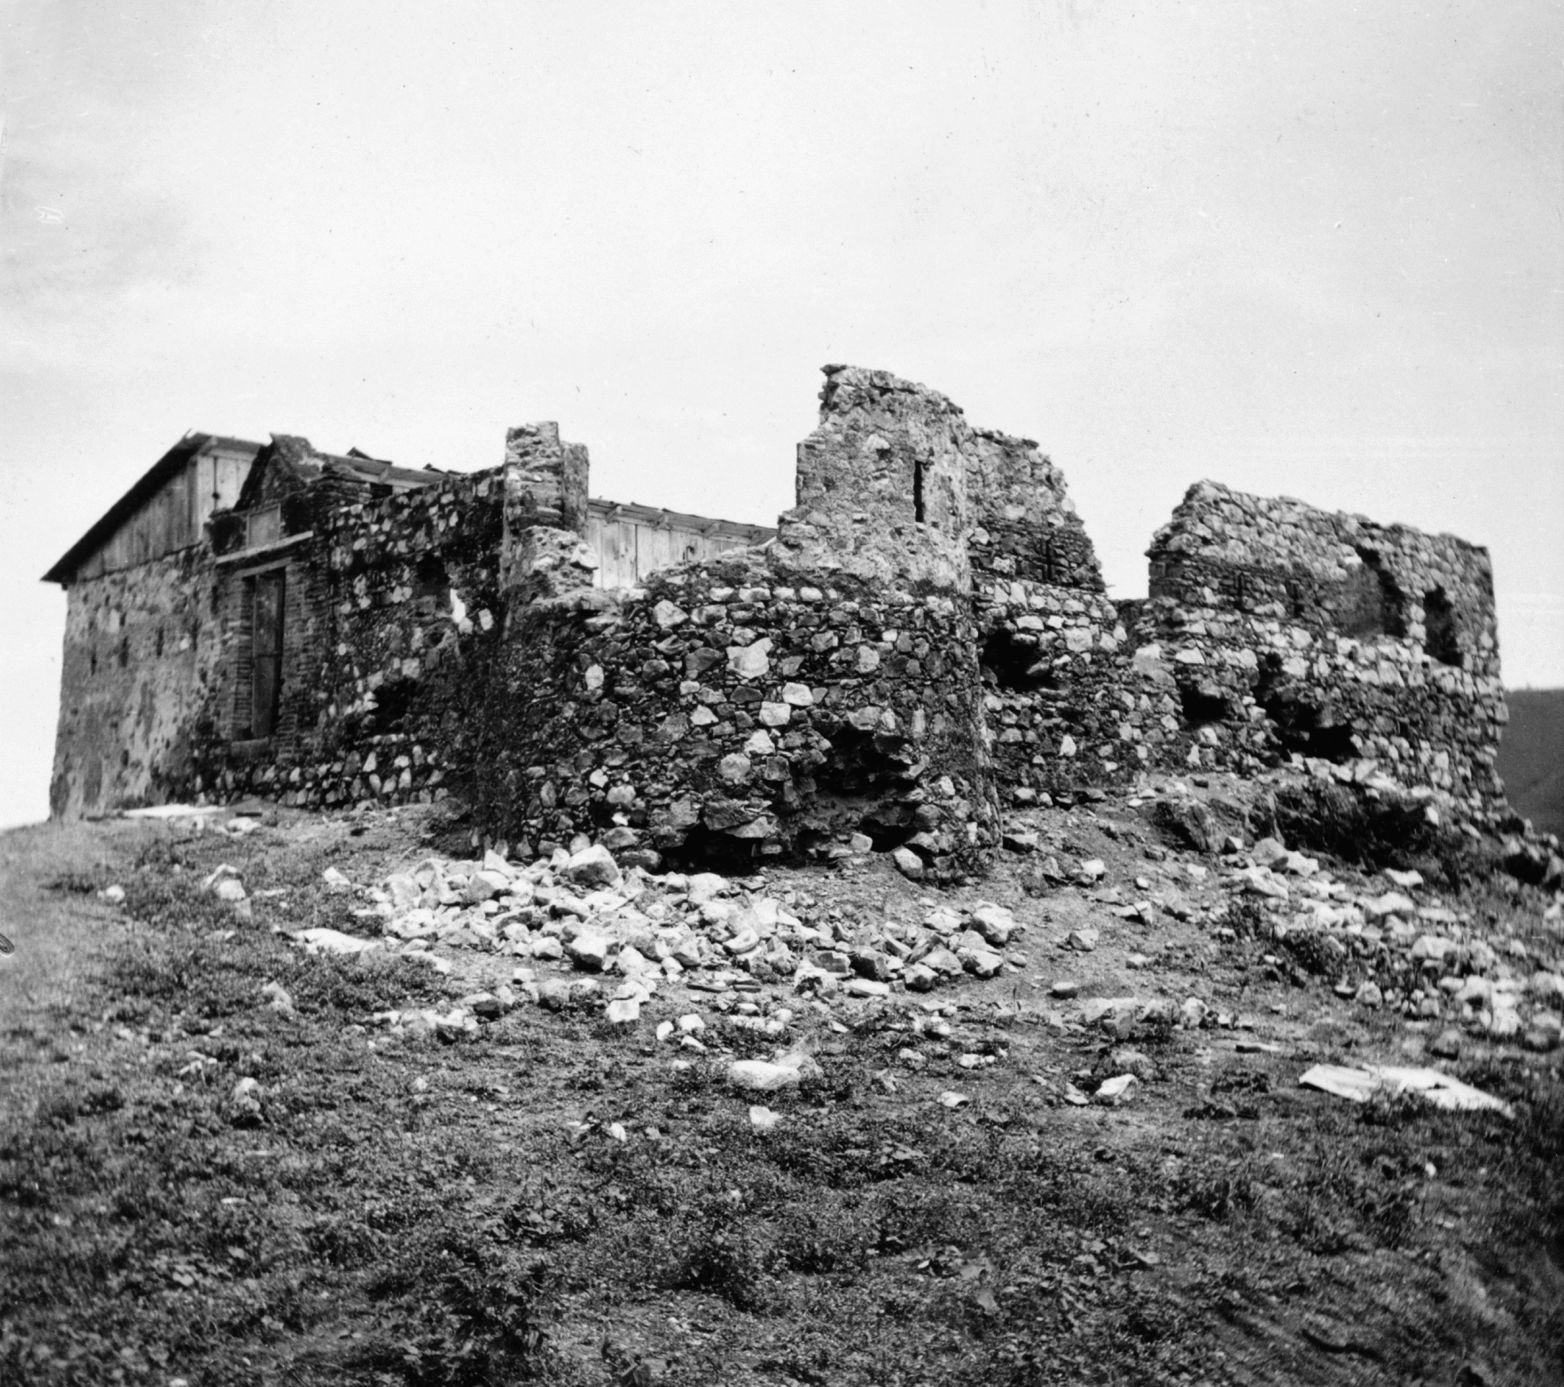 The ruins of El Caney’s stone fort on the day at the battle.